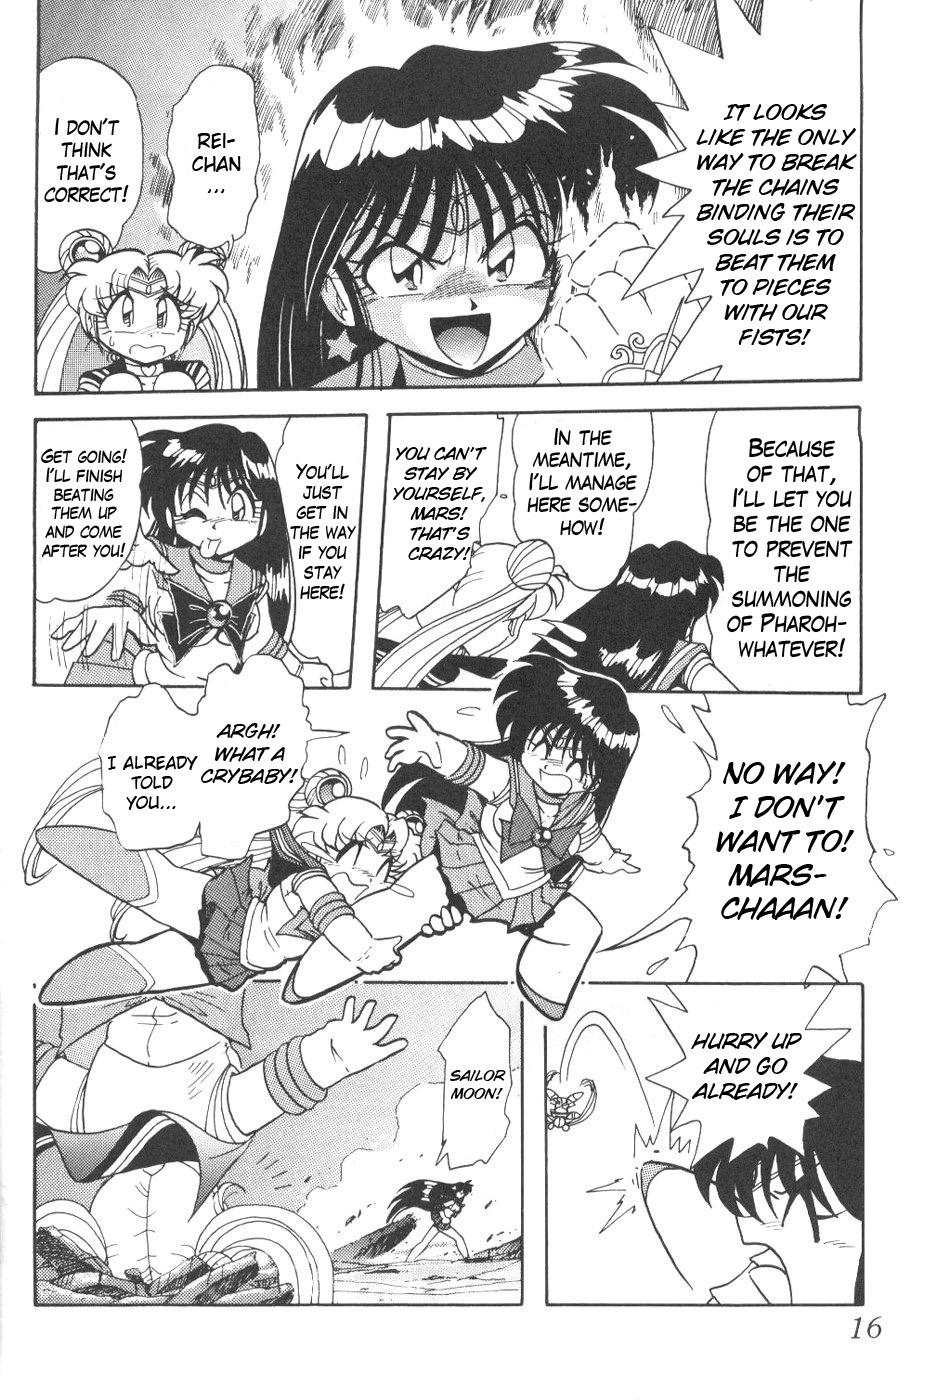 Thong Silent Saturn 8 - Sailor moon Gay Trimmed - Page 13